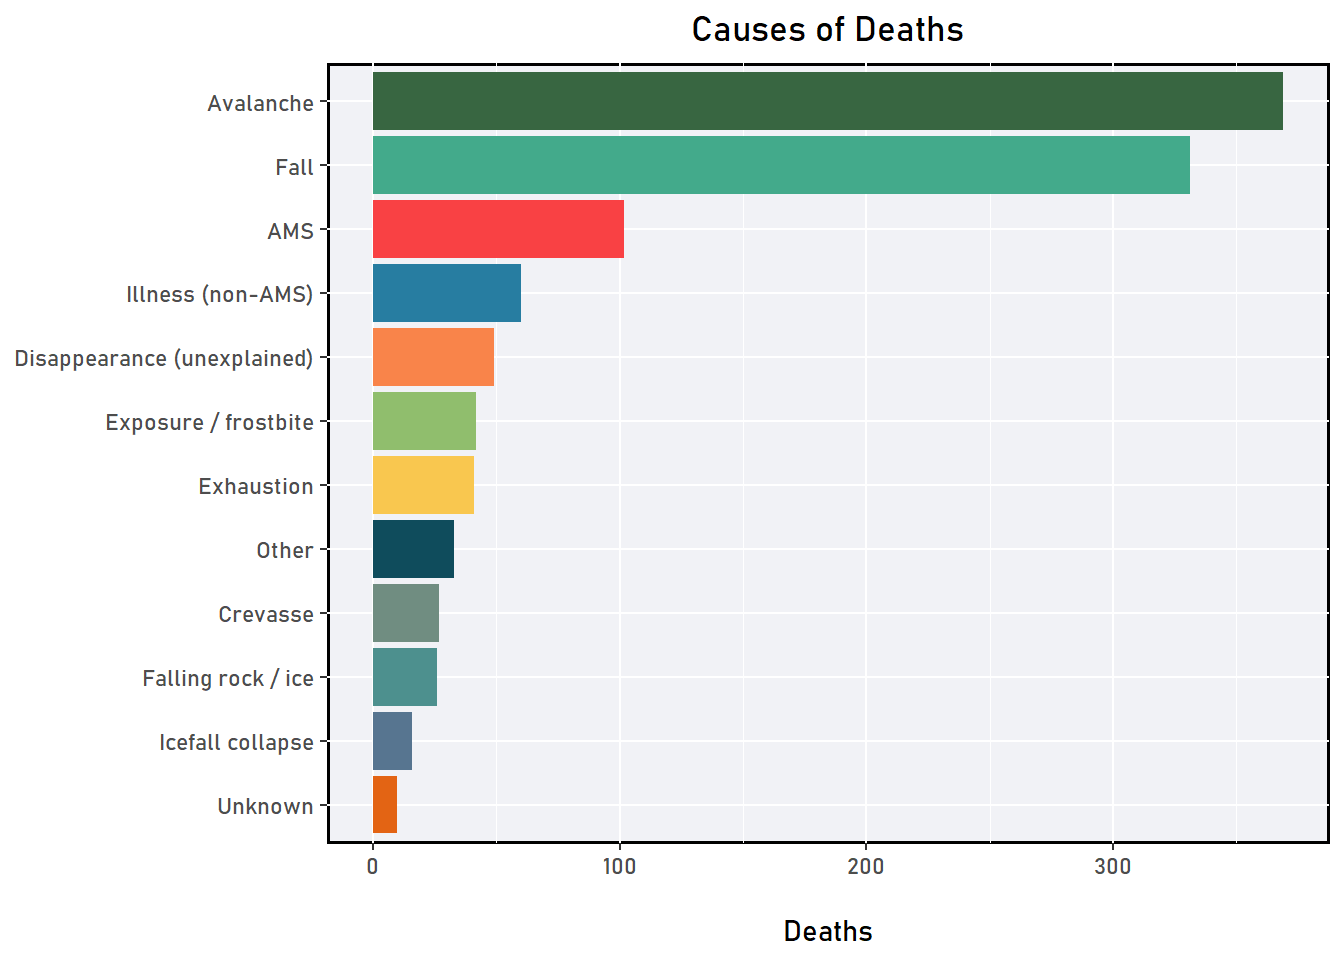 The figure shows major causes of deaths during expeditions